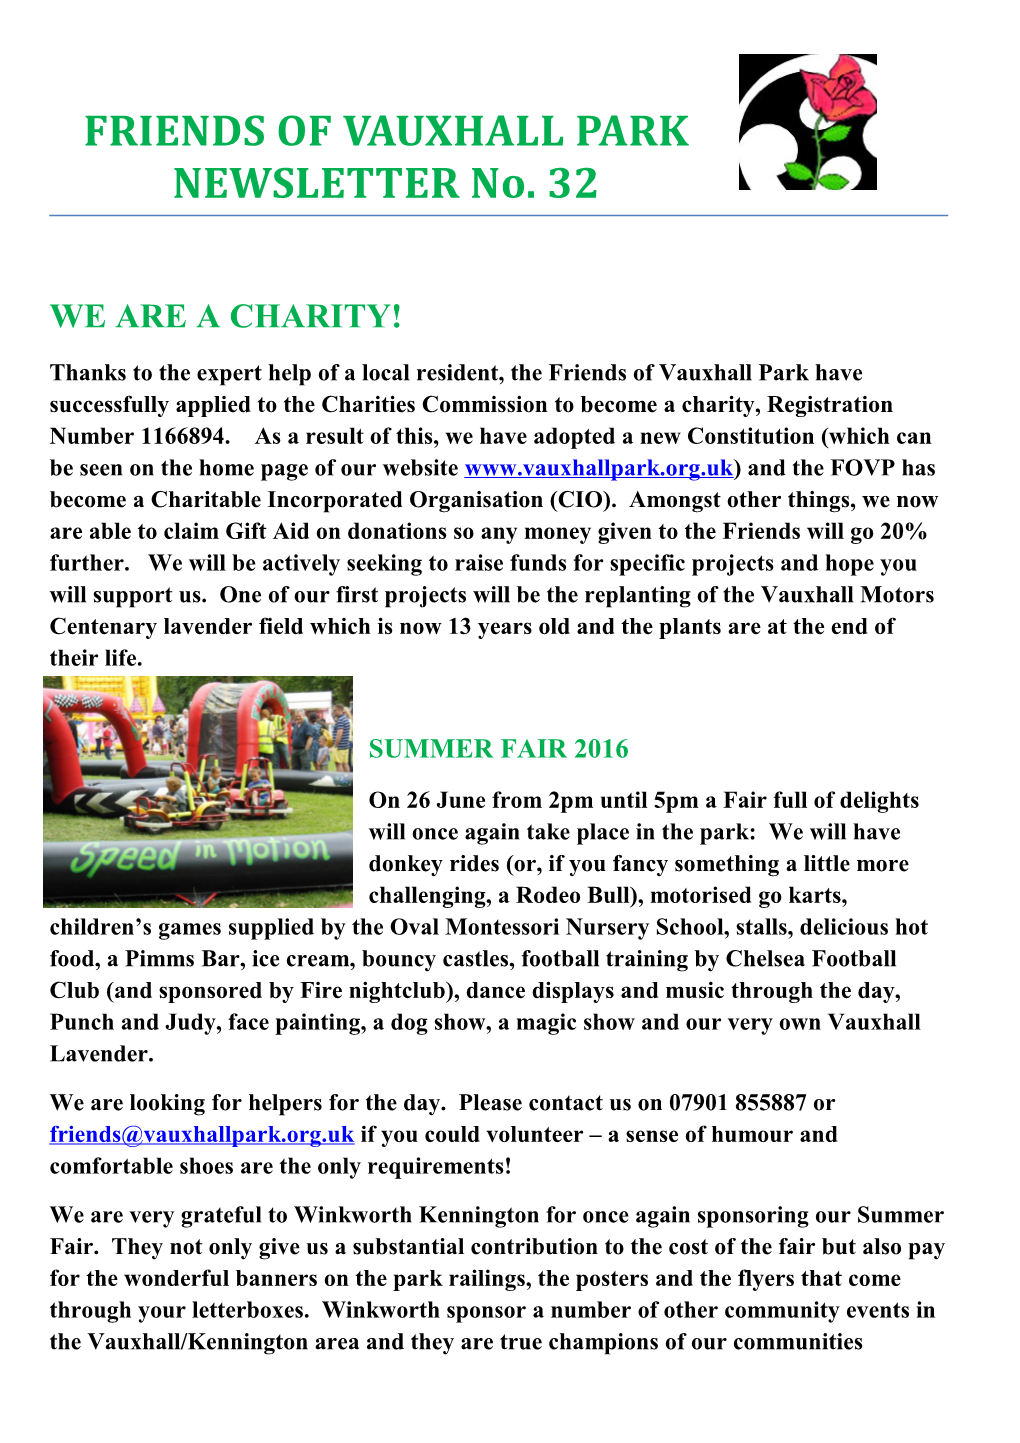 FRIENDS of VAUXHALL PARKNEWSLETTER No. 32